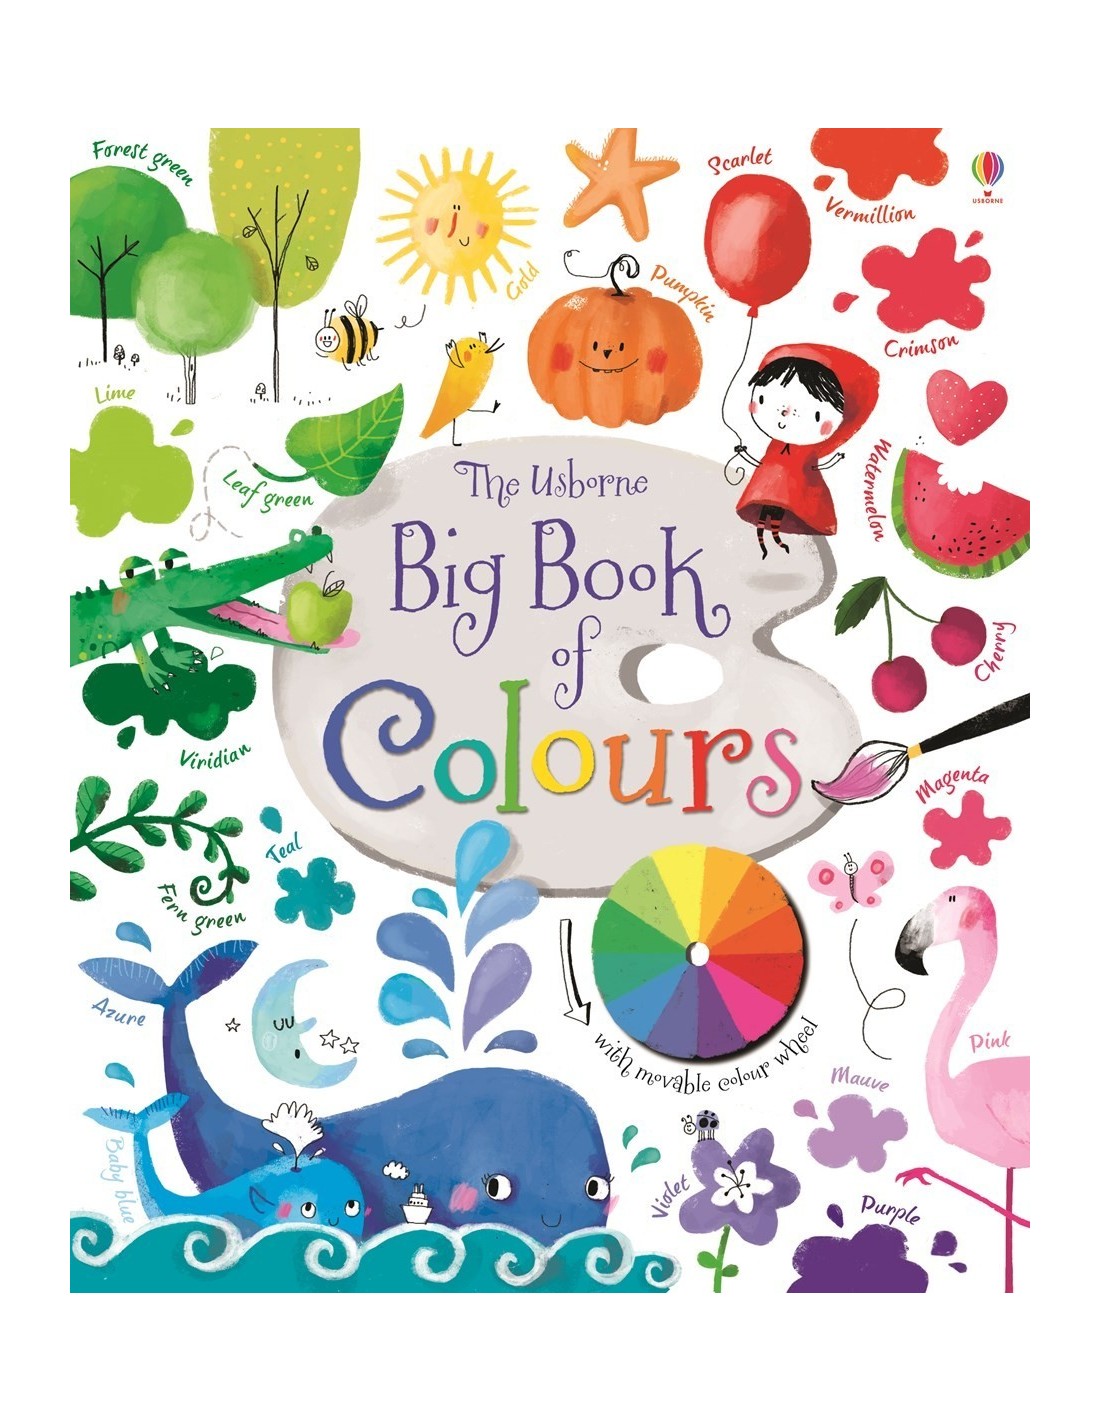 Big book of colours